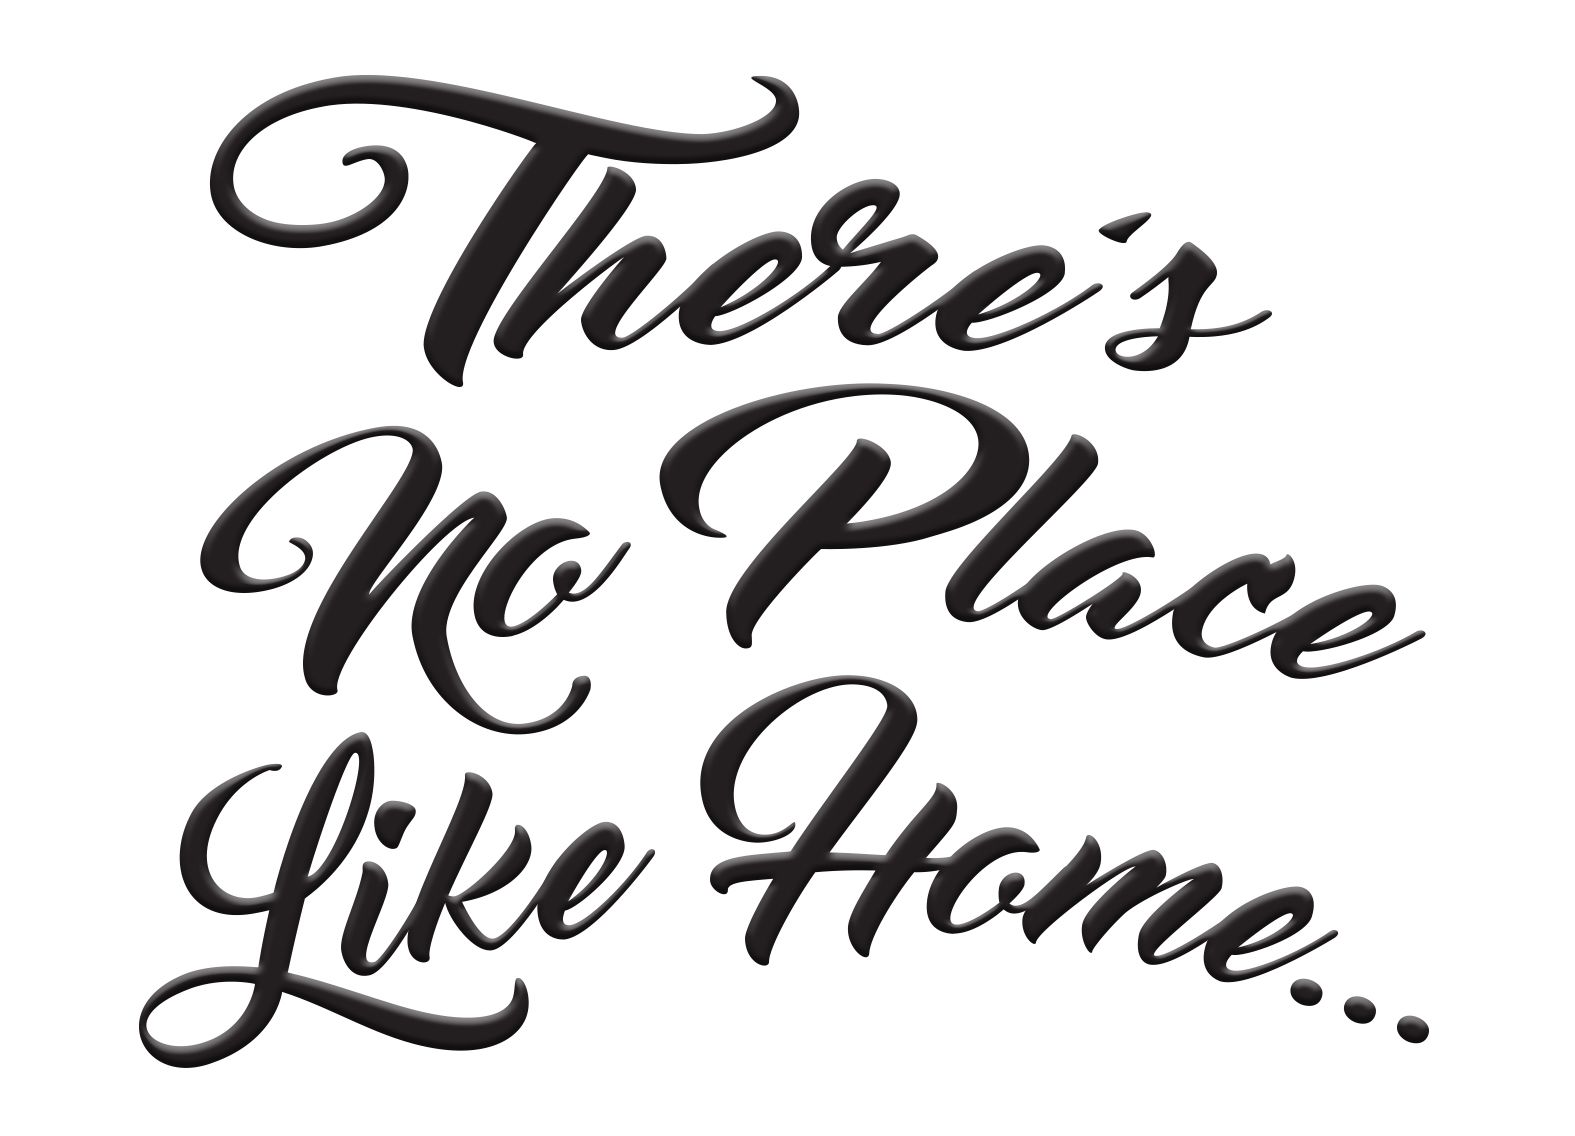 There's No Place Like Home ... In Xenia Ohio!